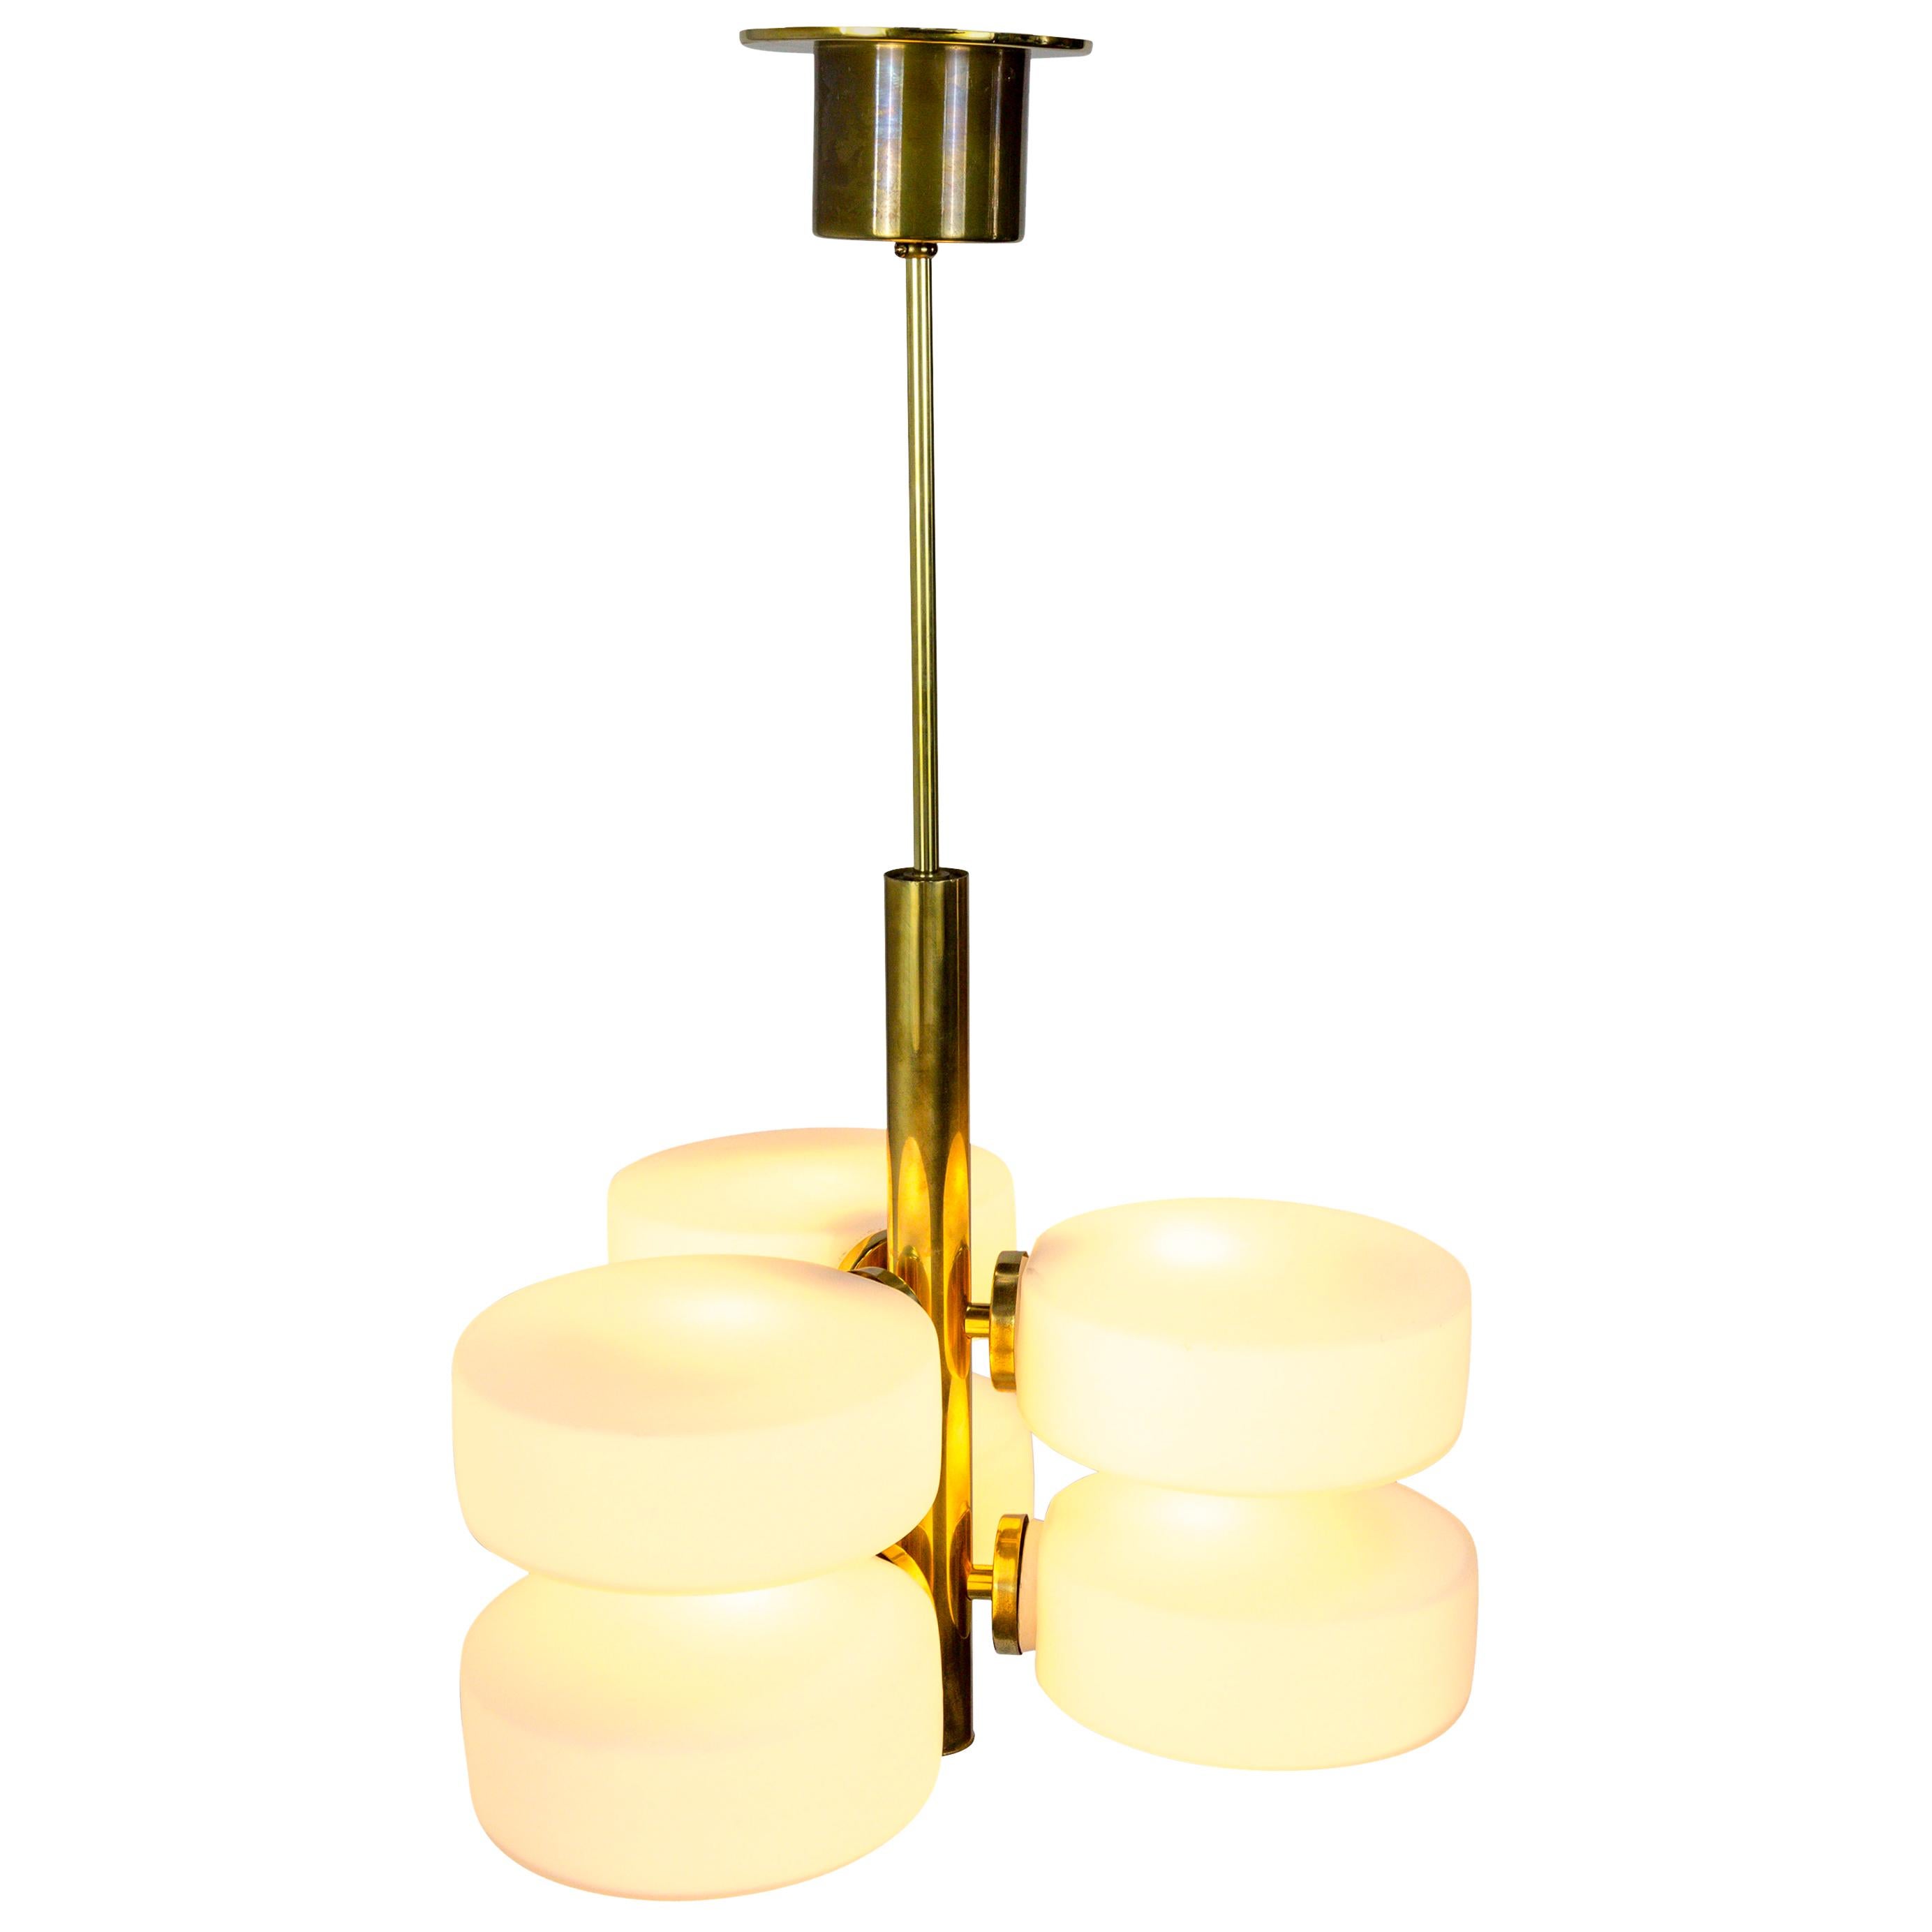 A rare Kaiser Leuchten sputnik pendant light with a sleek, polished brass stem and canopy, and six candelabra sockets with white, frosted glass disks, Germany, 1960s. Glass is easily pops on and off of socket for quick bulb replacement. Measures: